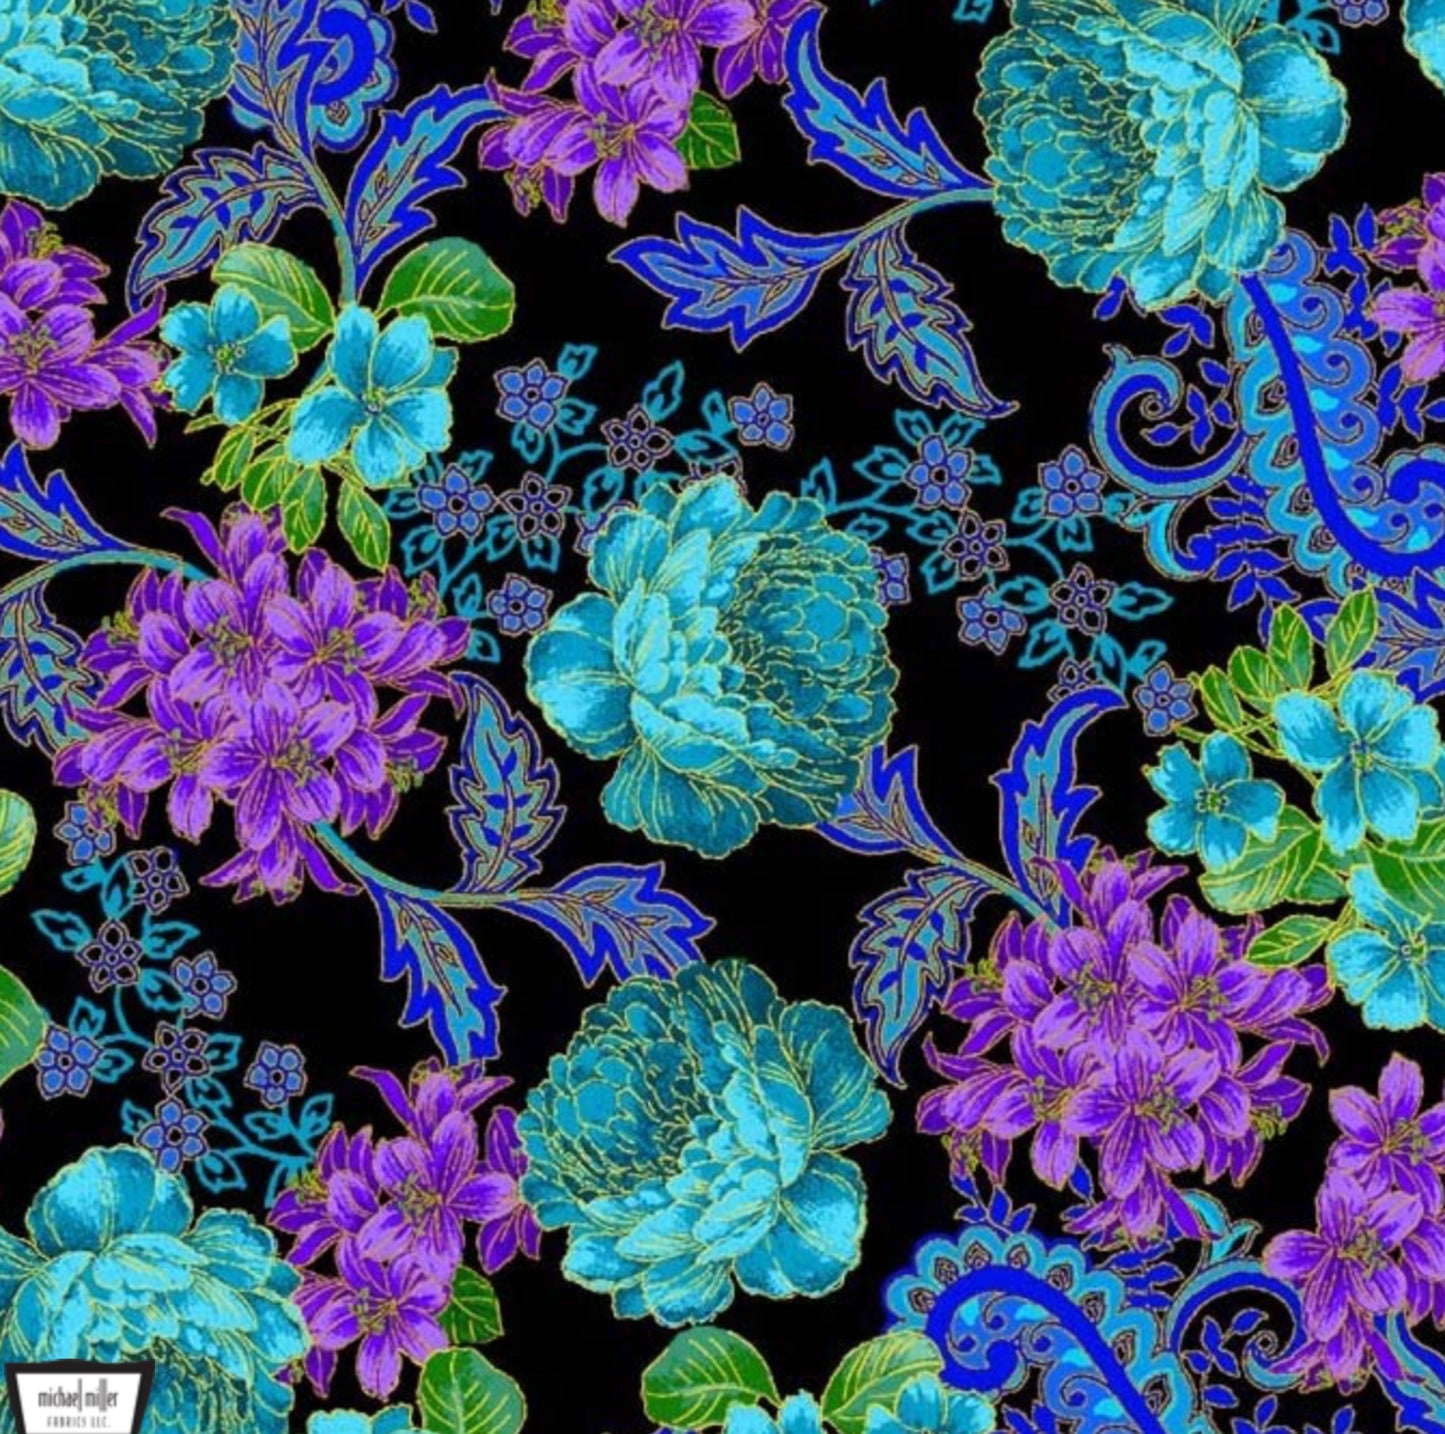 Flowery Scrolls Fabric from the Opulent Collection by Micheael Miller Fabrics. Lush Florals and Paisleys in purple, blue, and teal with metallic accents. 